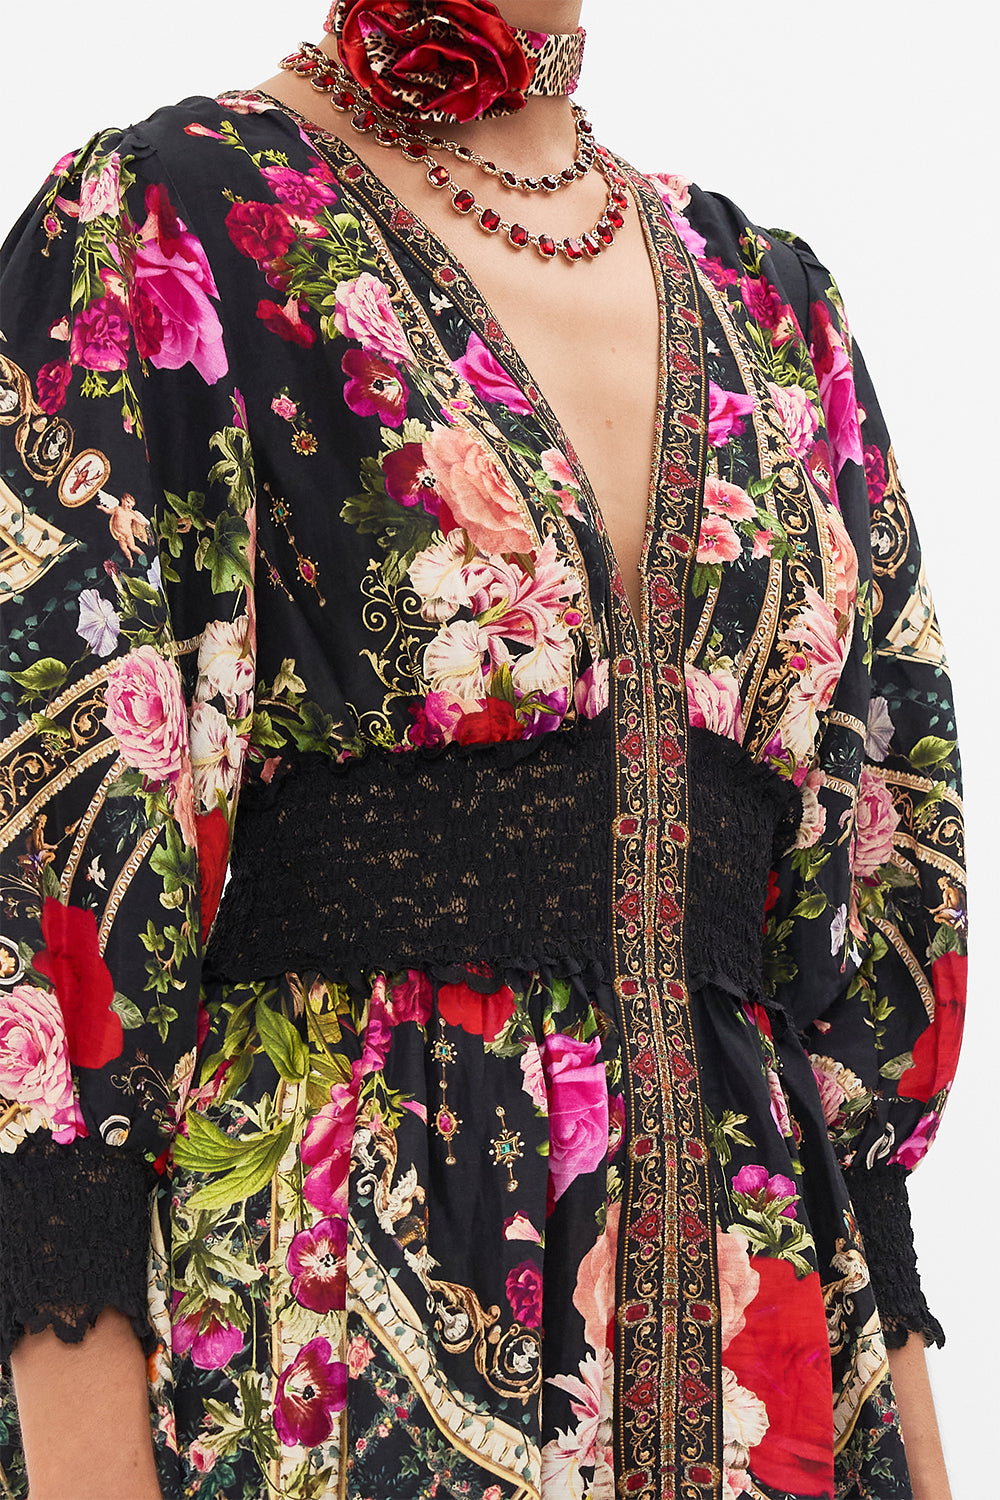 Detail view of model wearing CAMILLA floral maxi dress in reservation For Love print